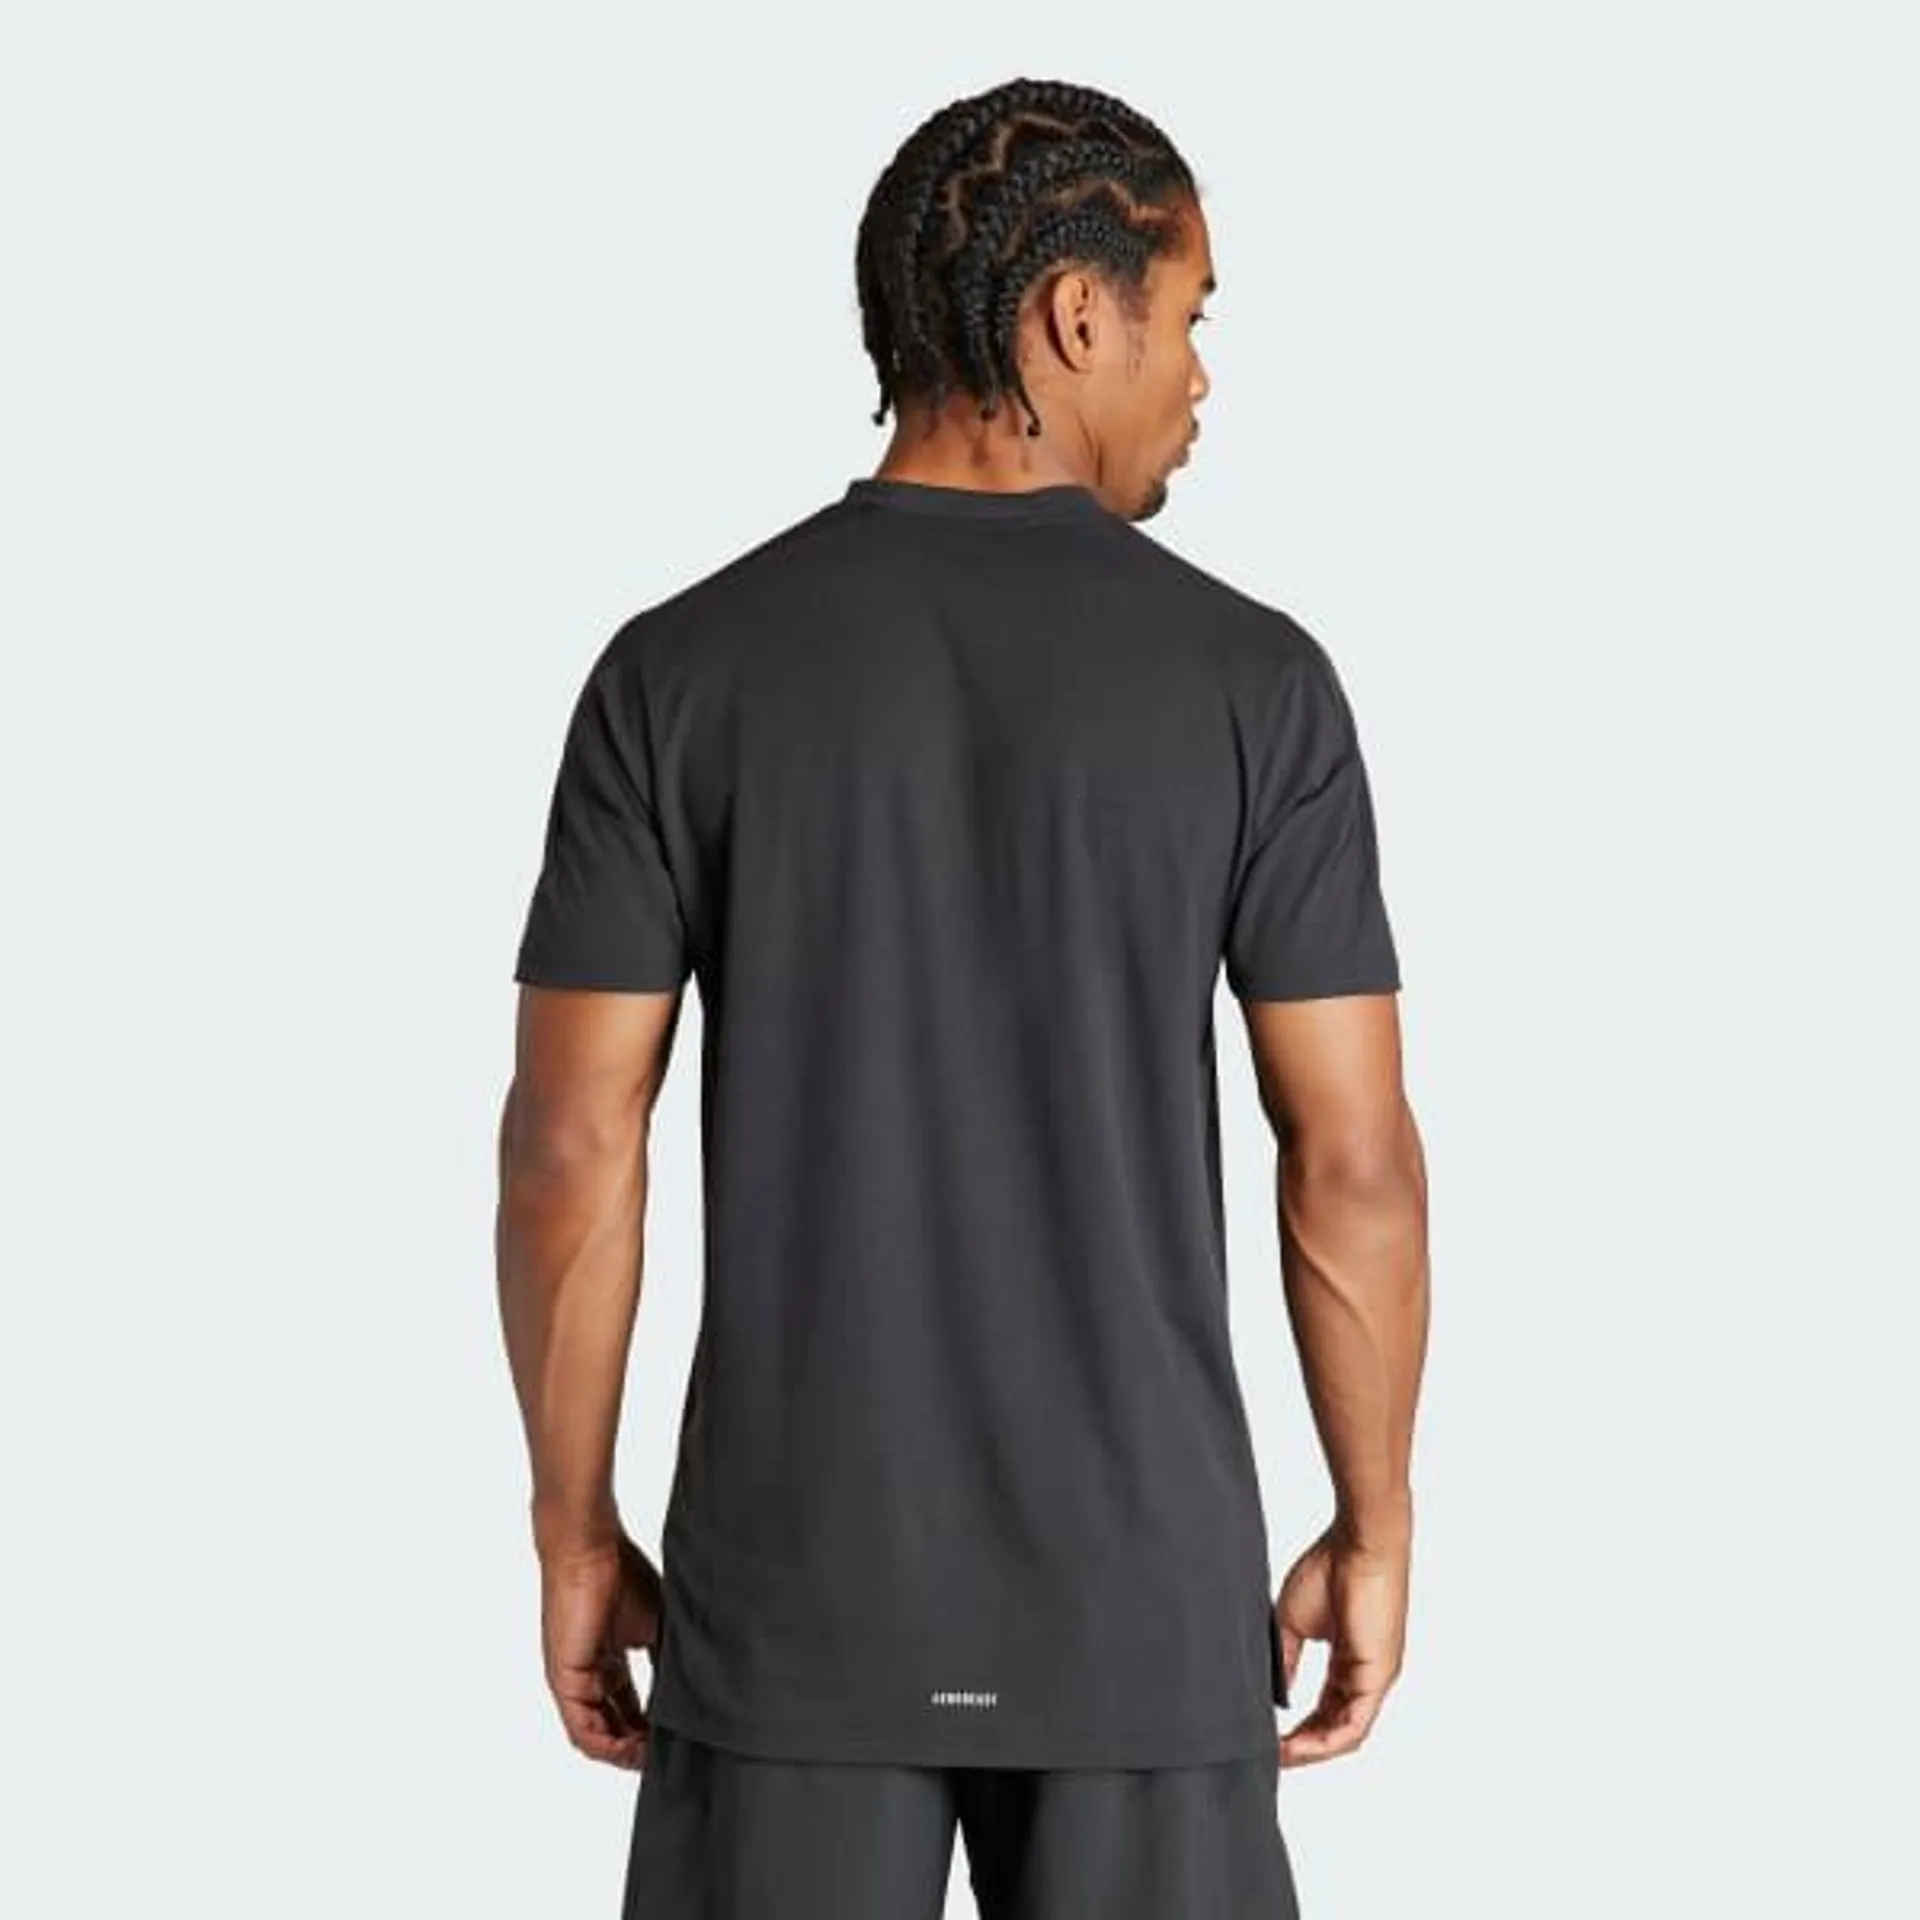 Designed for Training Workout Tee